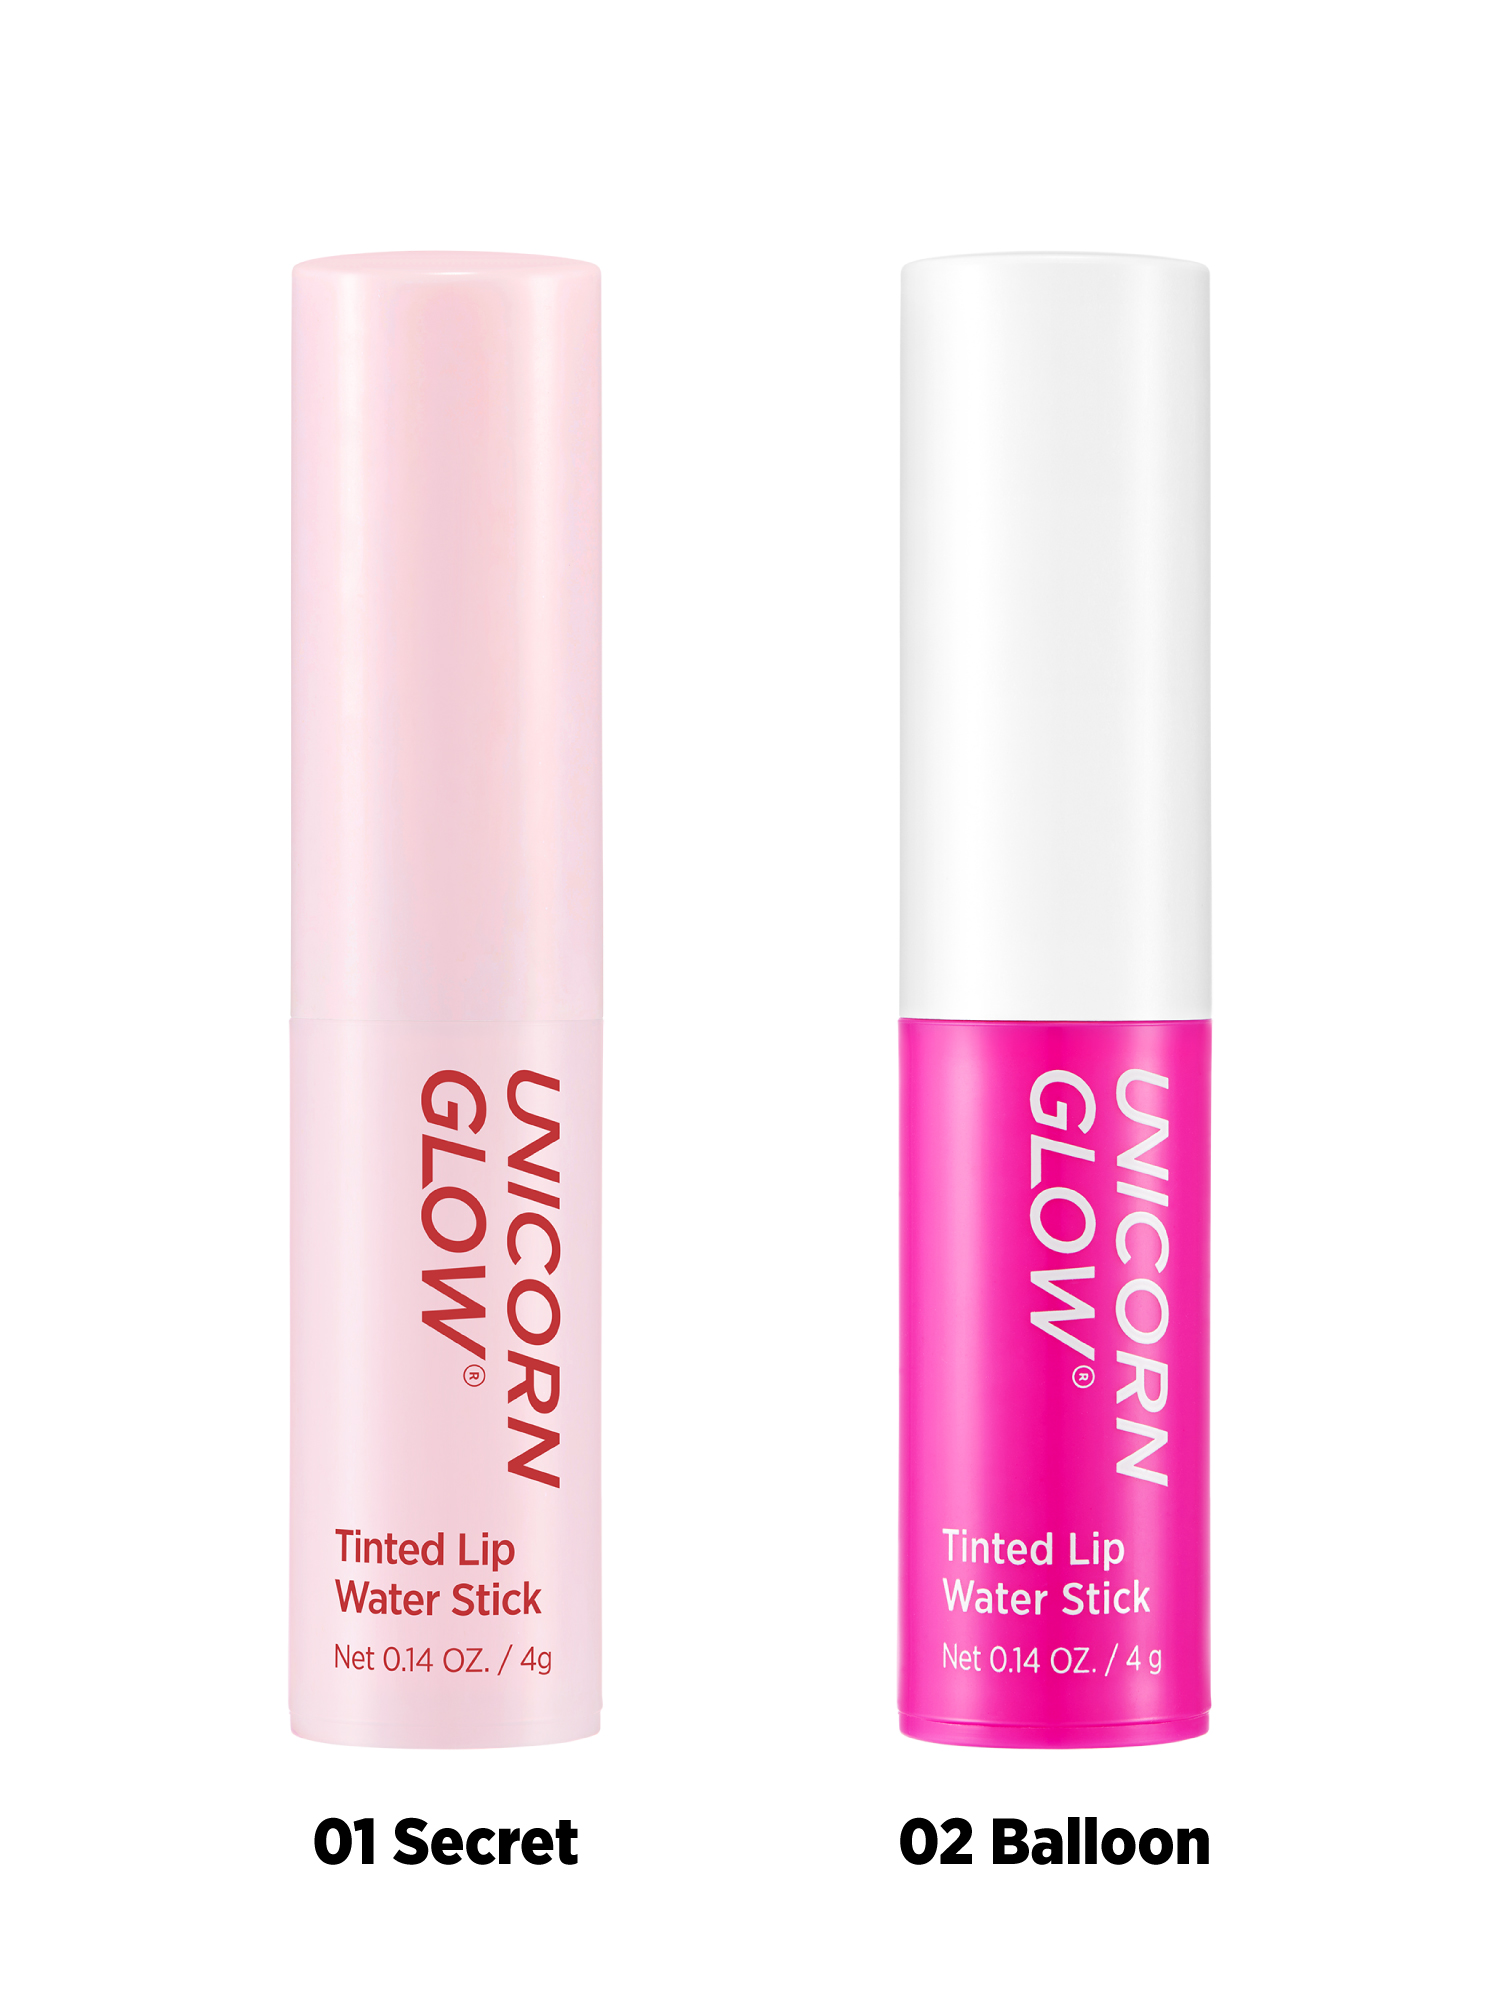 Unicorn Glow Color Squeeze Tint #4 Candy Red